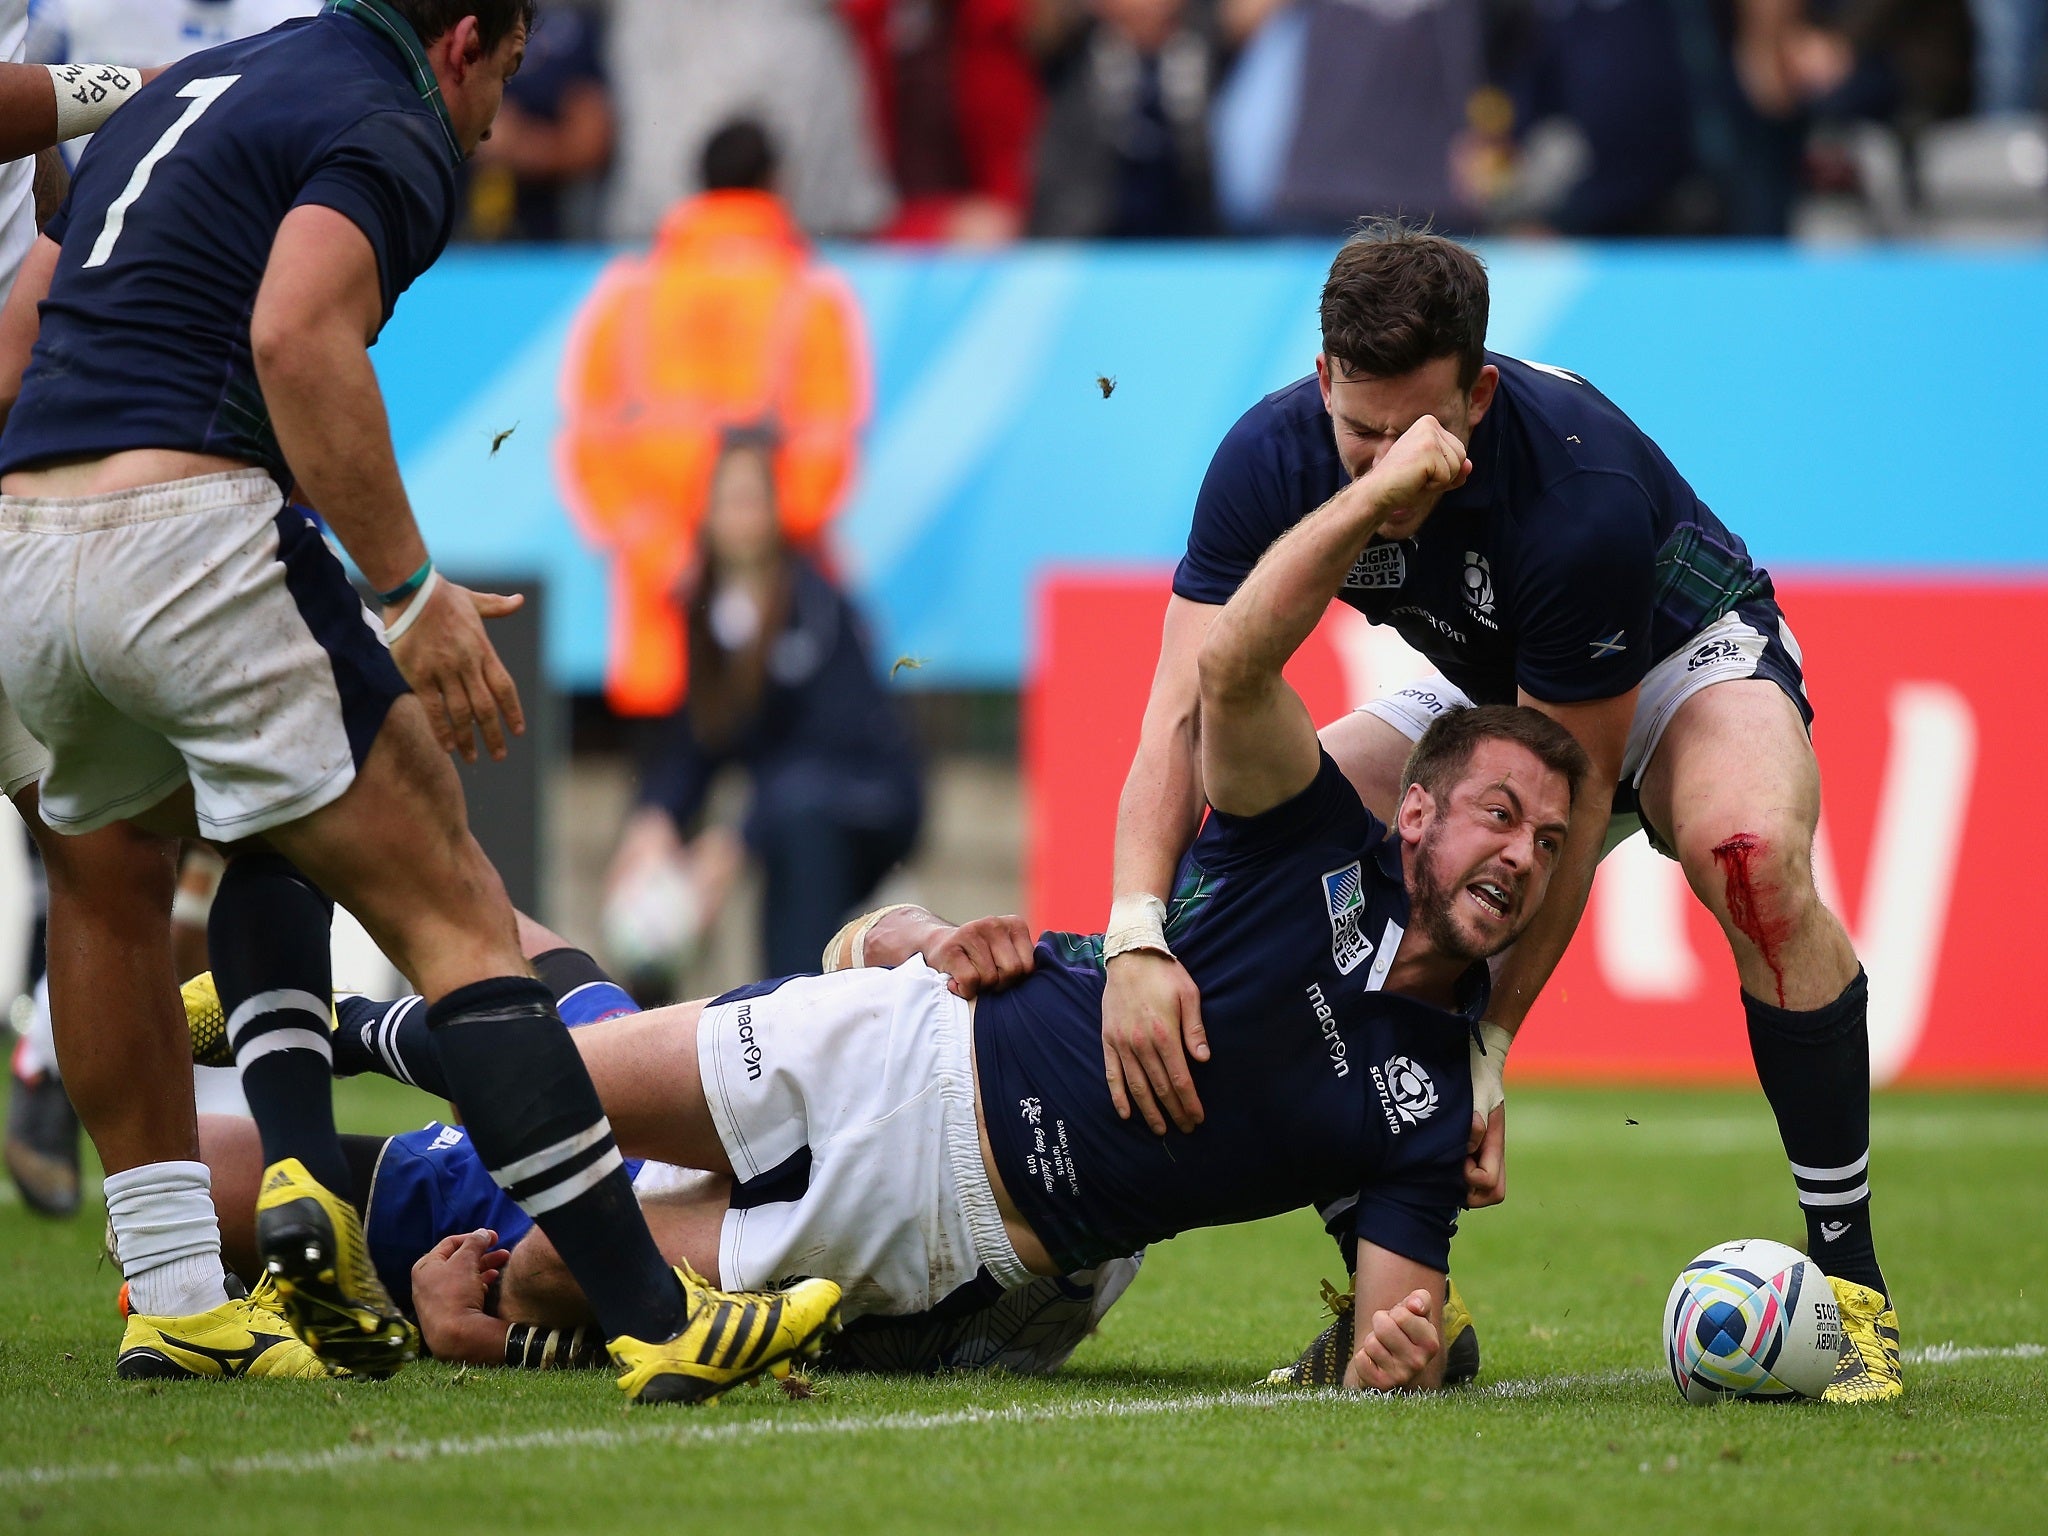 Greig Laidlaw scores the winning try against Samoa